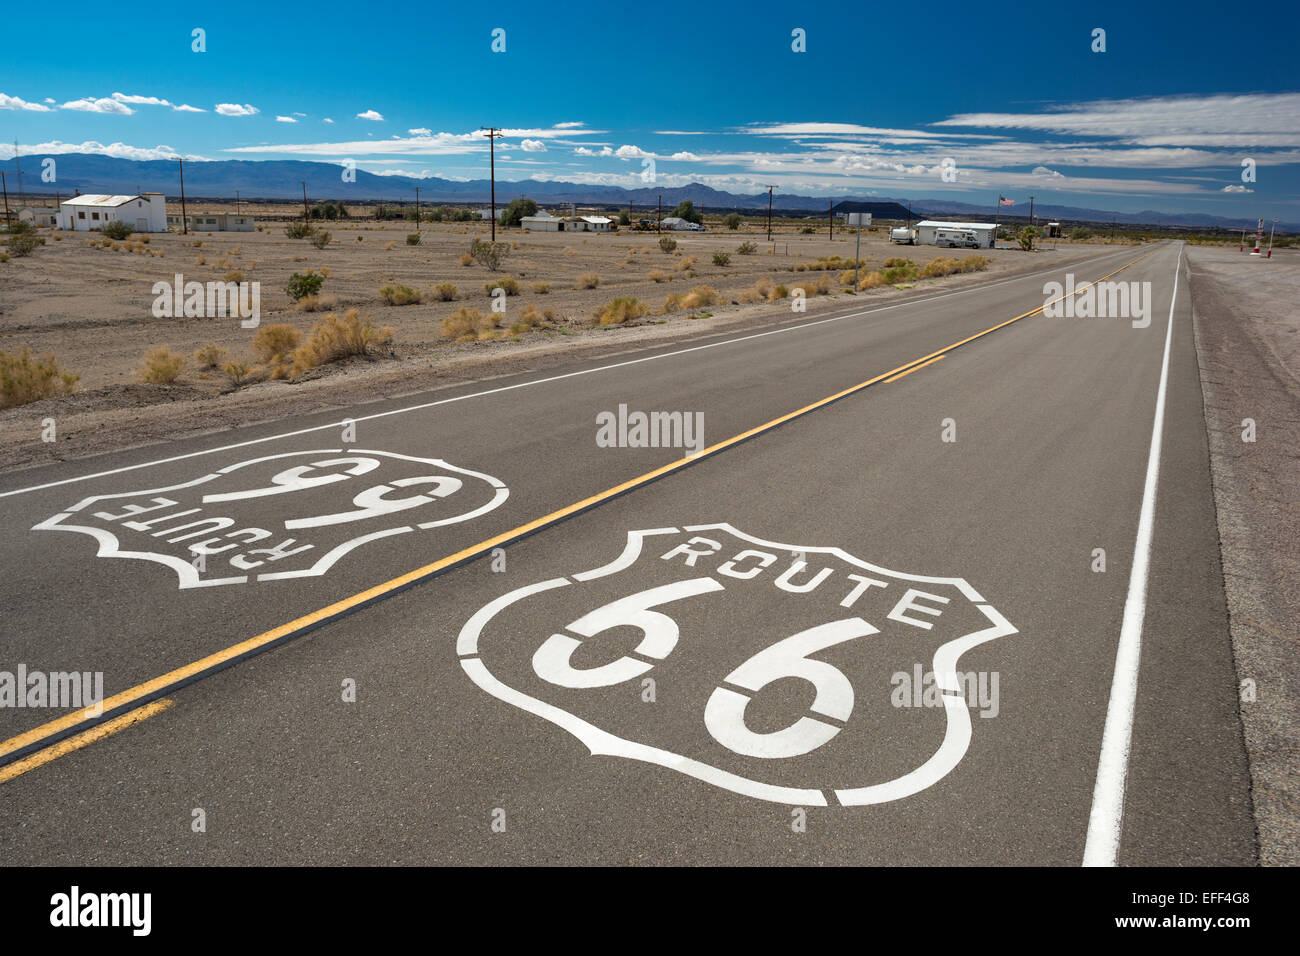 ROUTE 66 SHIELDS NATIONAL TRAILS HIGHWAY AMBOY CALIFORNIA USA Stock Photo